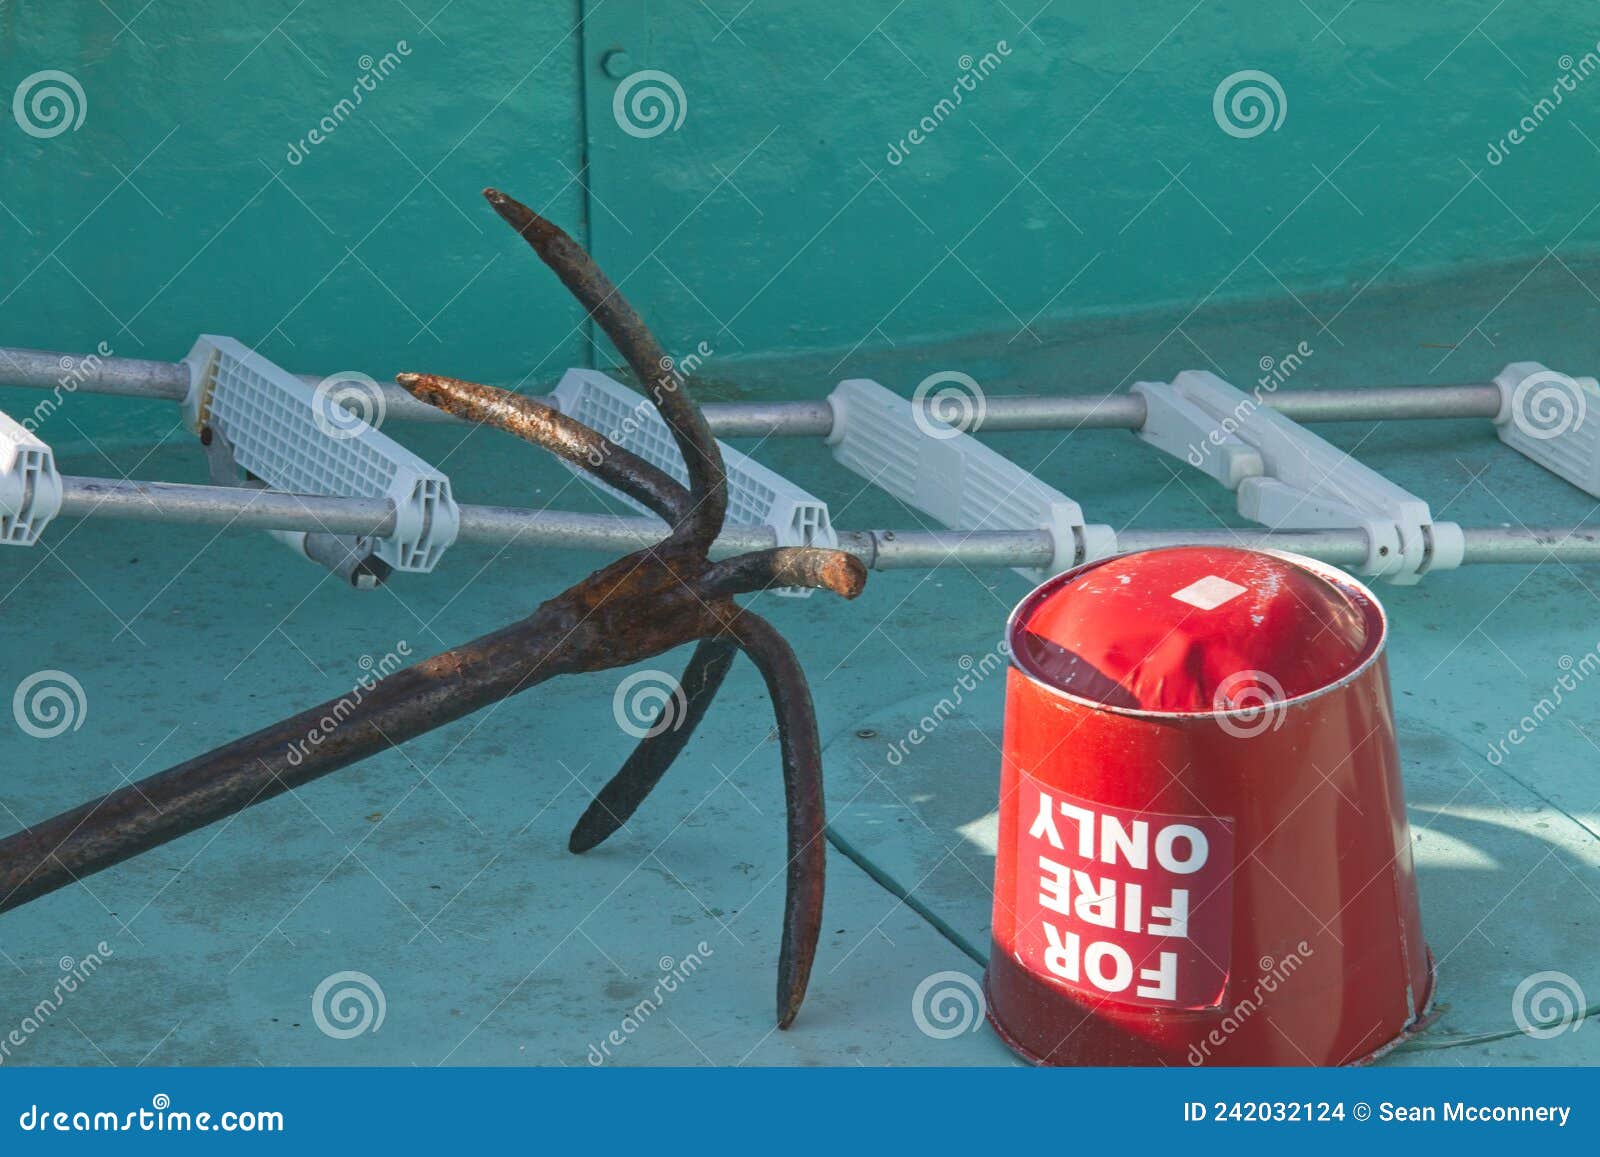 https://thumbs.dreamstime.com/z/anchor-red-fire-water-bucket-some-items-found-fishing-vessels-items-you-may-find-fishing-boat-242032124.jpg